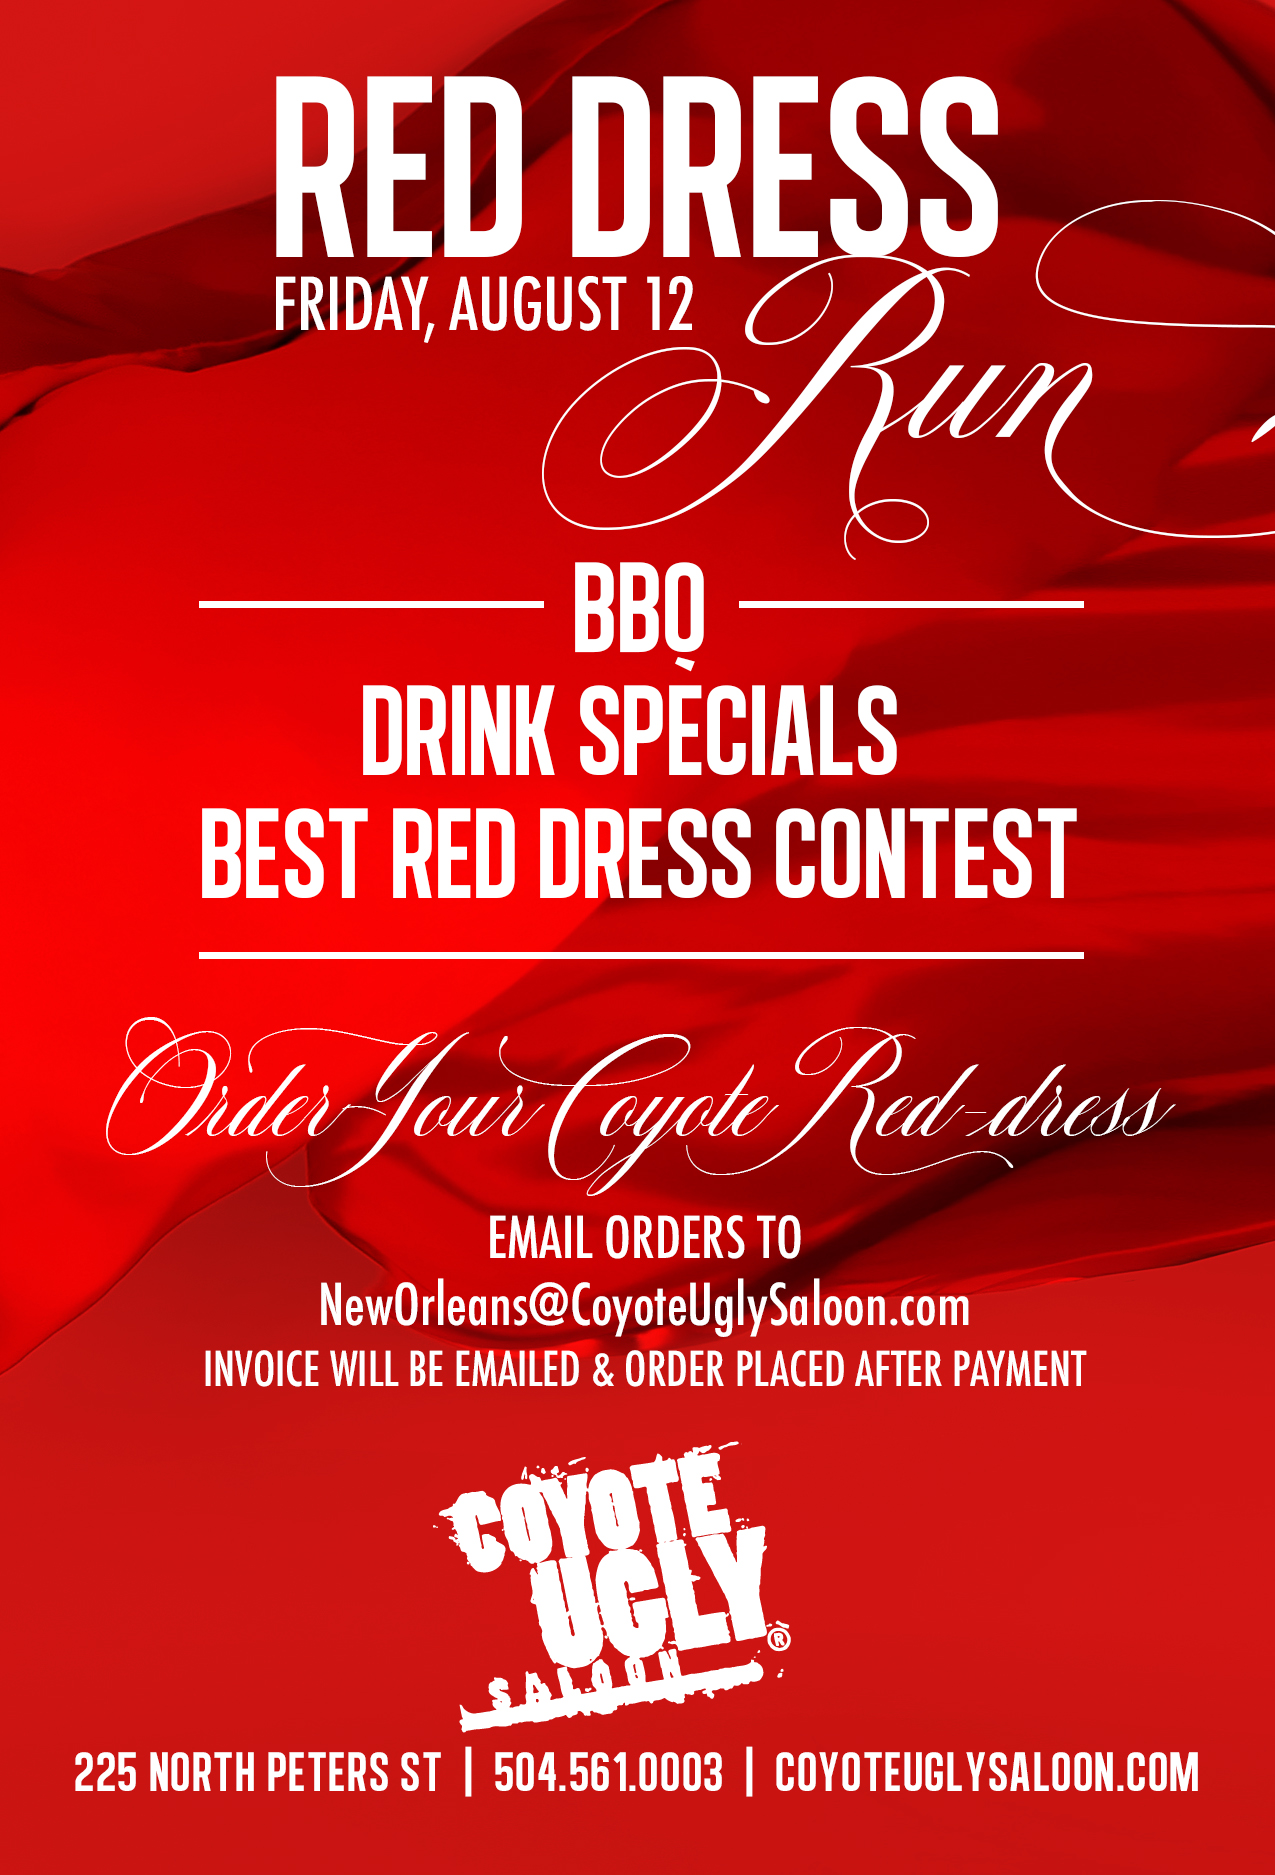 Red Dress Run in New Orleans on August 12, 2022